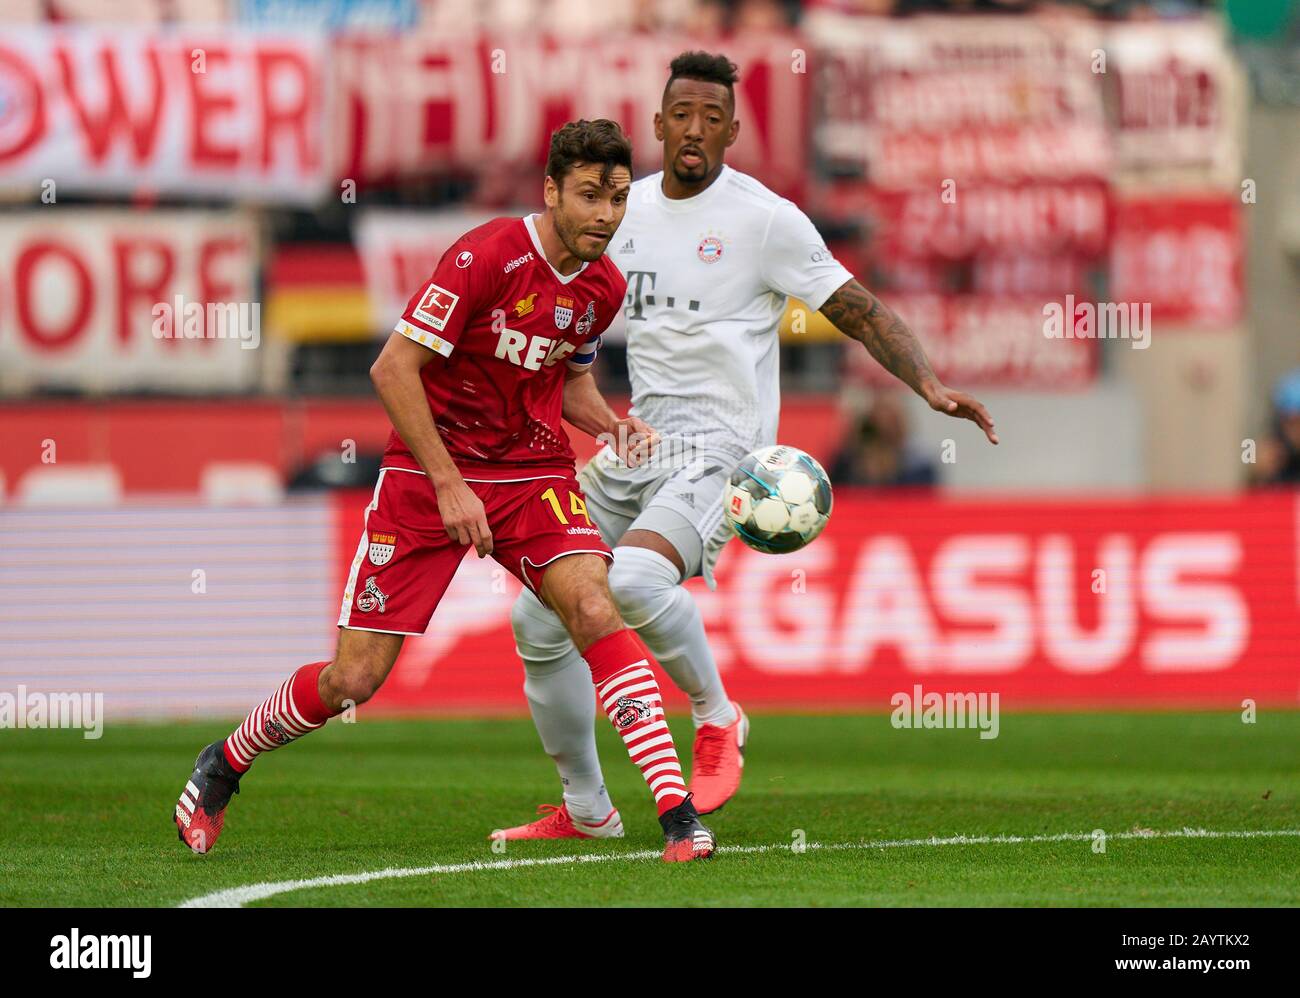 Football Cologne - Munich, Cologne Feb 16, 2020. Jonas HECTOR, 1.FCK 14  compete for the ball, tackling, duel, header, zweikampf, action, fight against Jerome BOATENG (FCB 17)  1.FC KÖLN - FC BAYERN MUNICH 1-4  - DFL REGULATIONS PROHIBIT ANY USE OF PHOTOGRAPHS as IMAGE SEQUENCES and/or QUASI-VIDEO -  1.German Soccer League , Düsseldorf, February 16, 2020.  Season 2019/2020, match day 22,  FCB, München © Peter Schatz / Alamy Live News Stock Photo